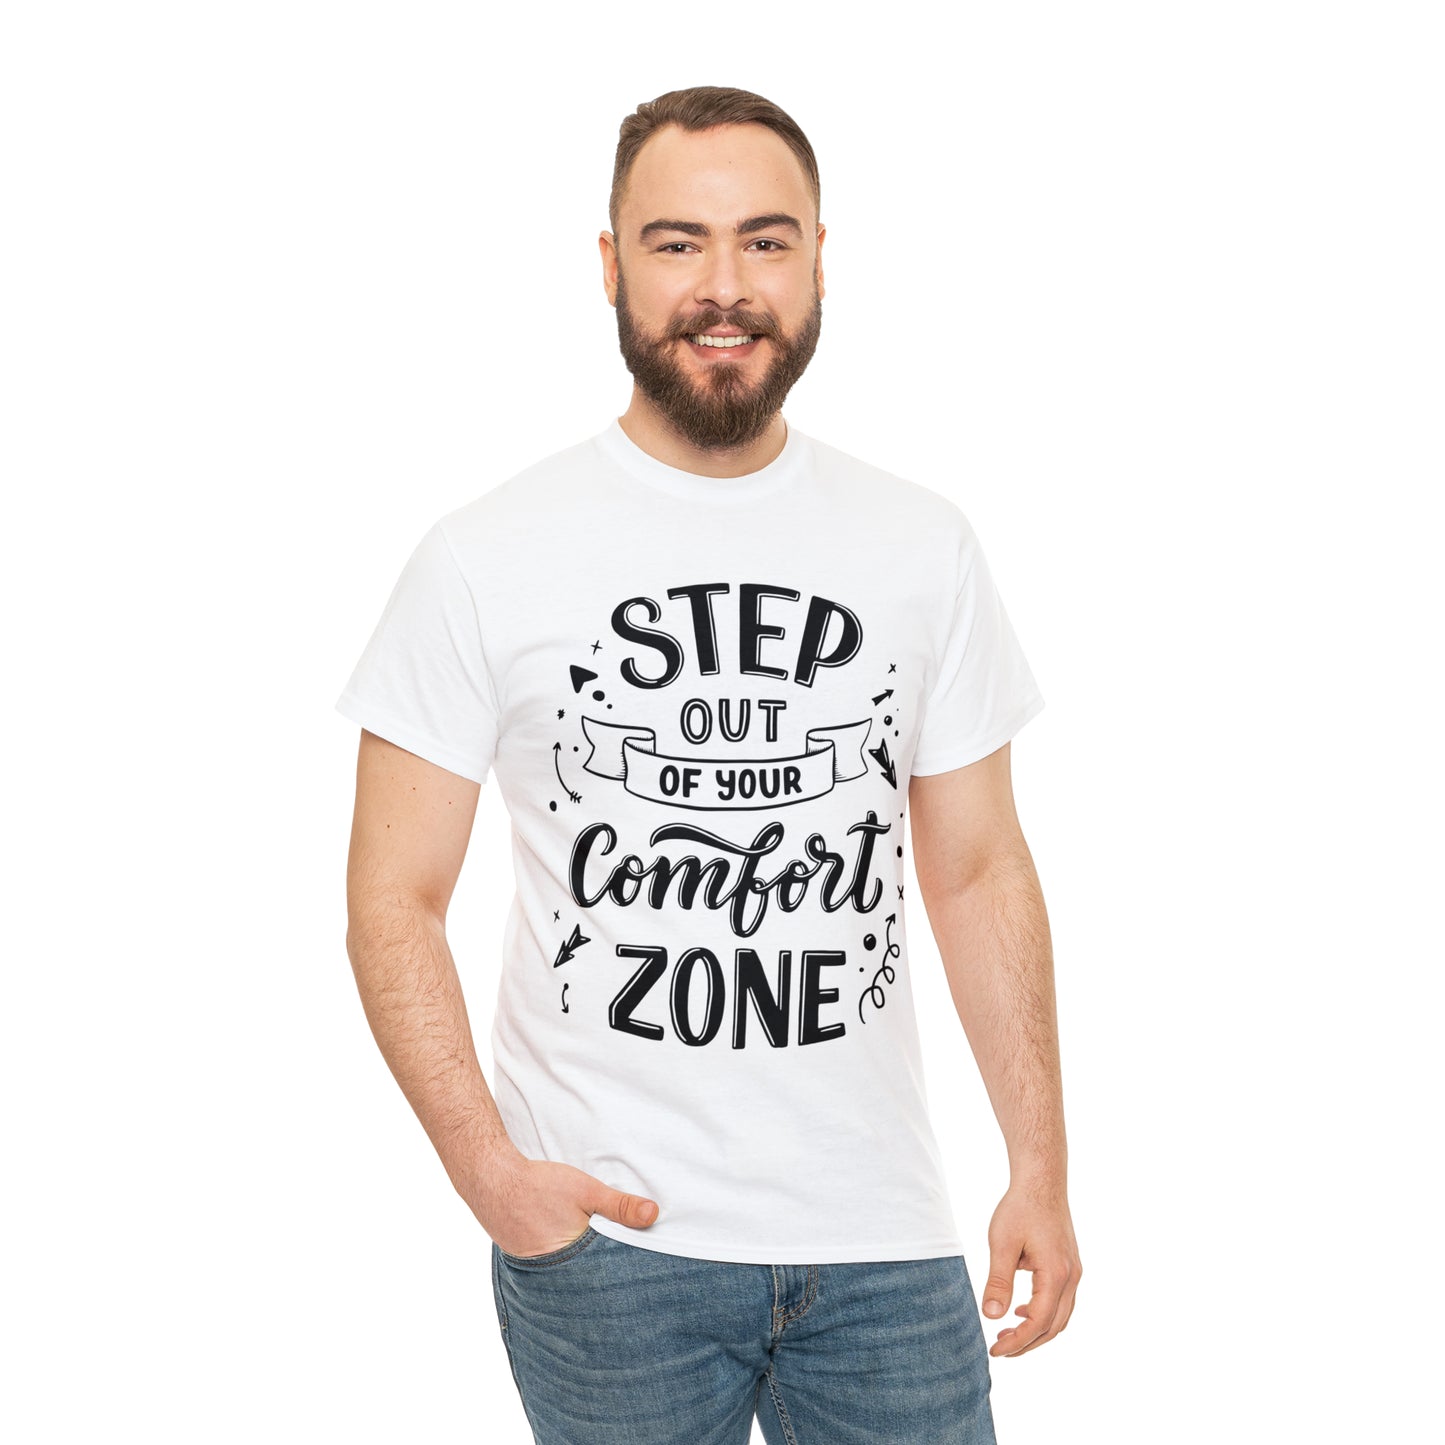 Introducing the Motivated T-shirt Quoted "Step Out of Your Comfort Zone"